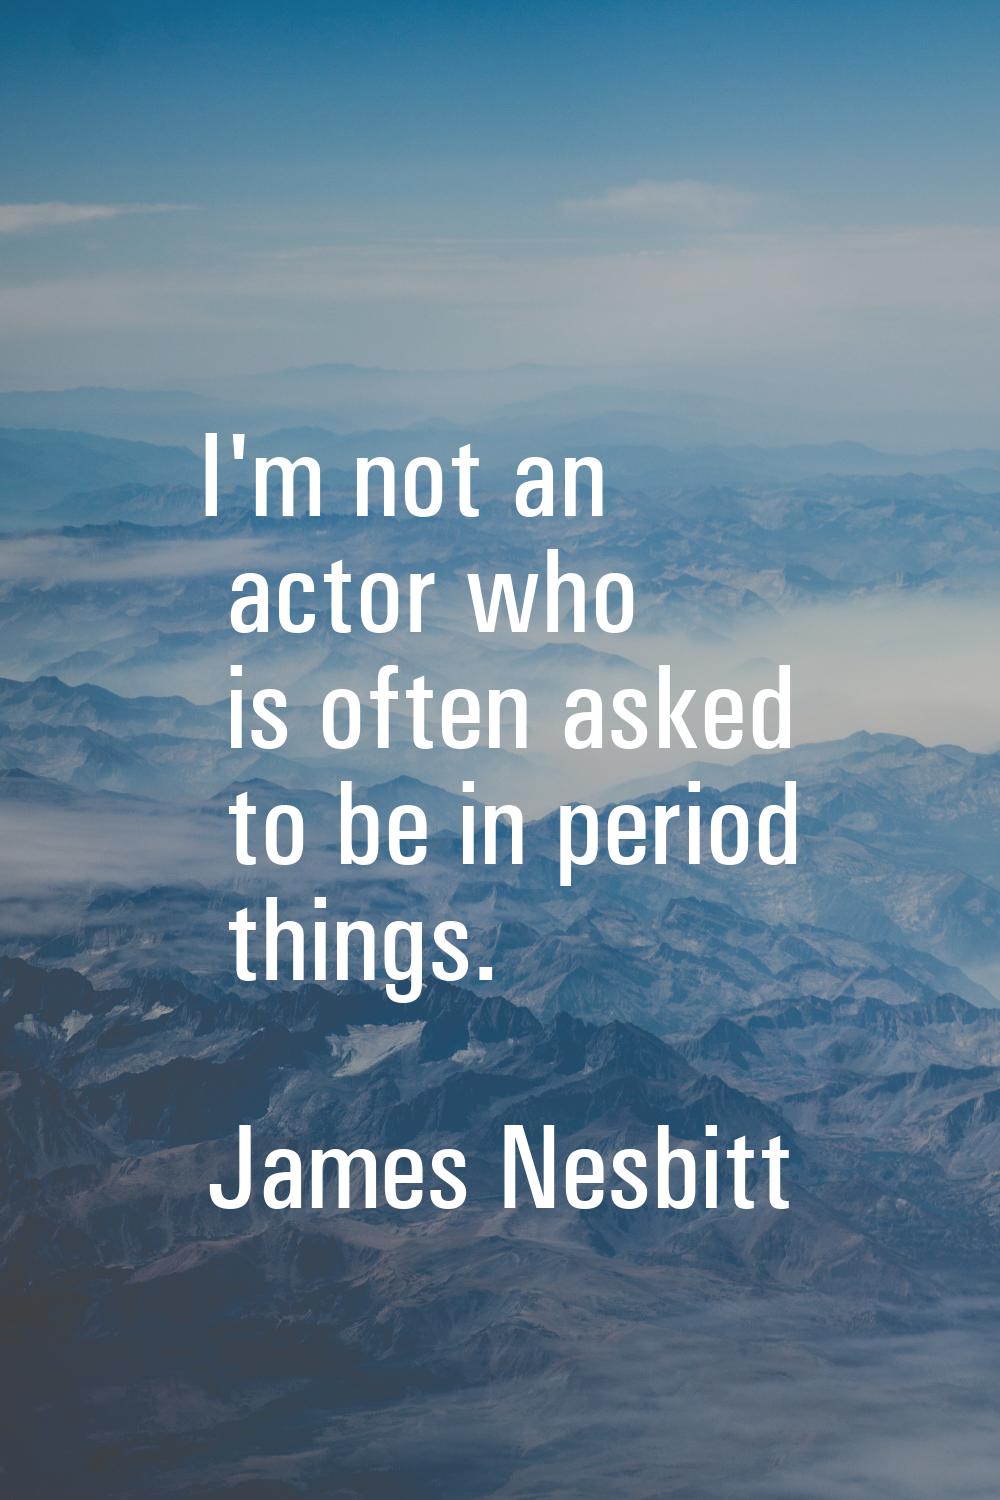 I'm not an actor who is often asked to be in period things.